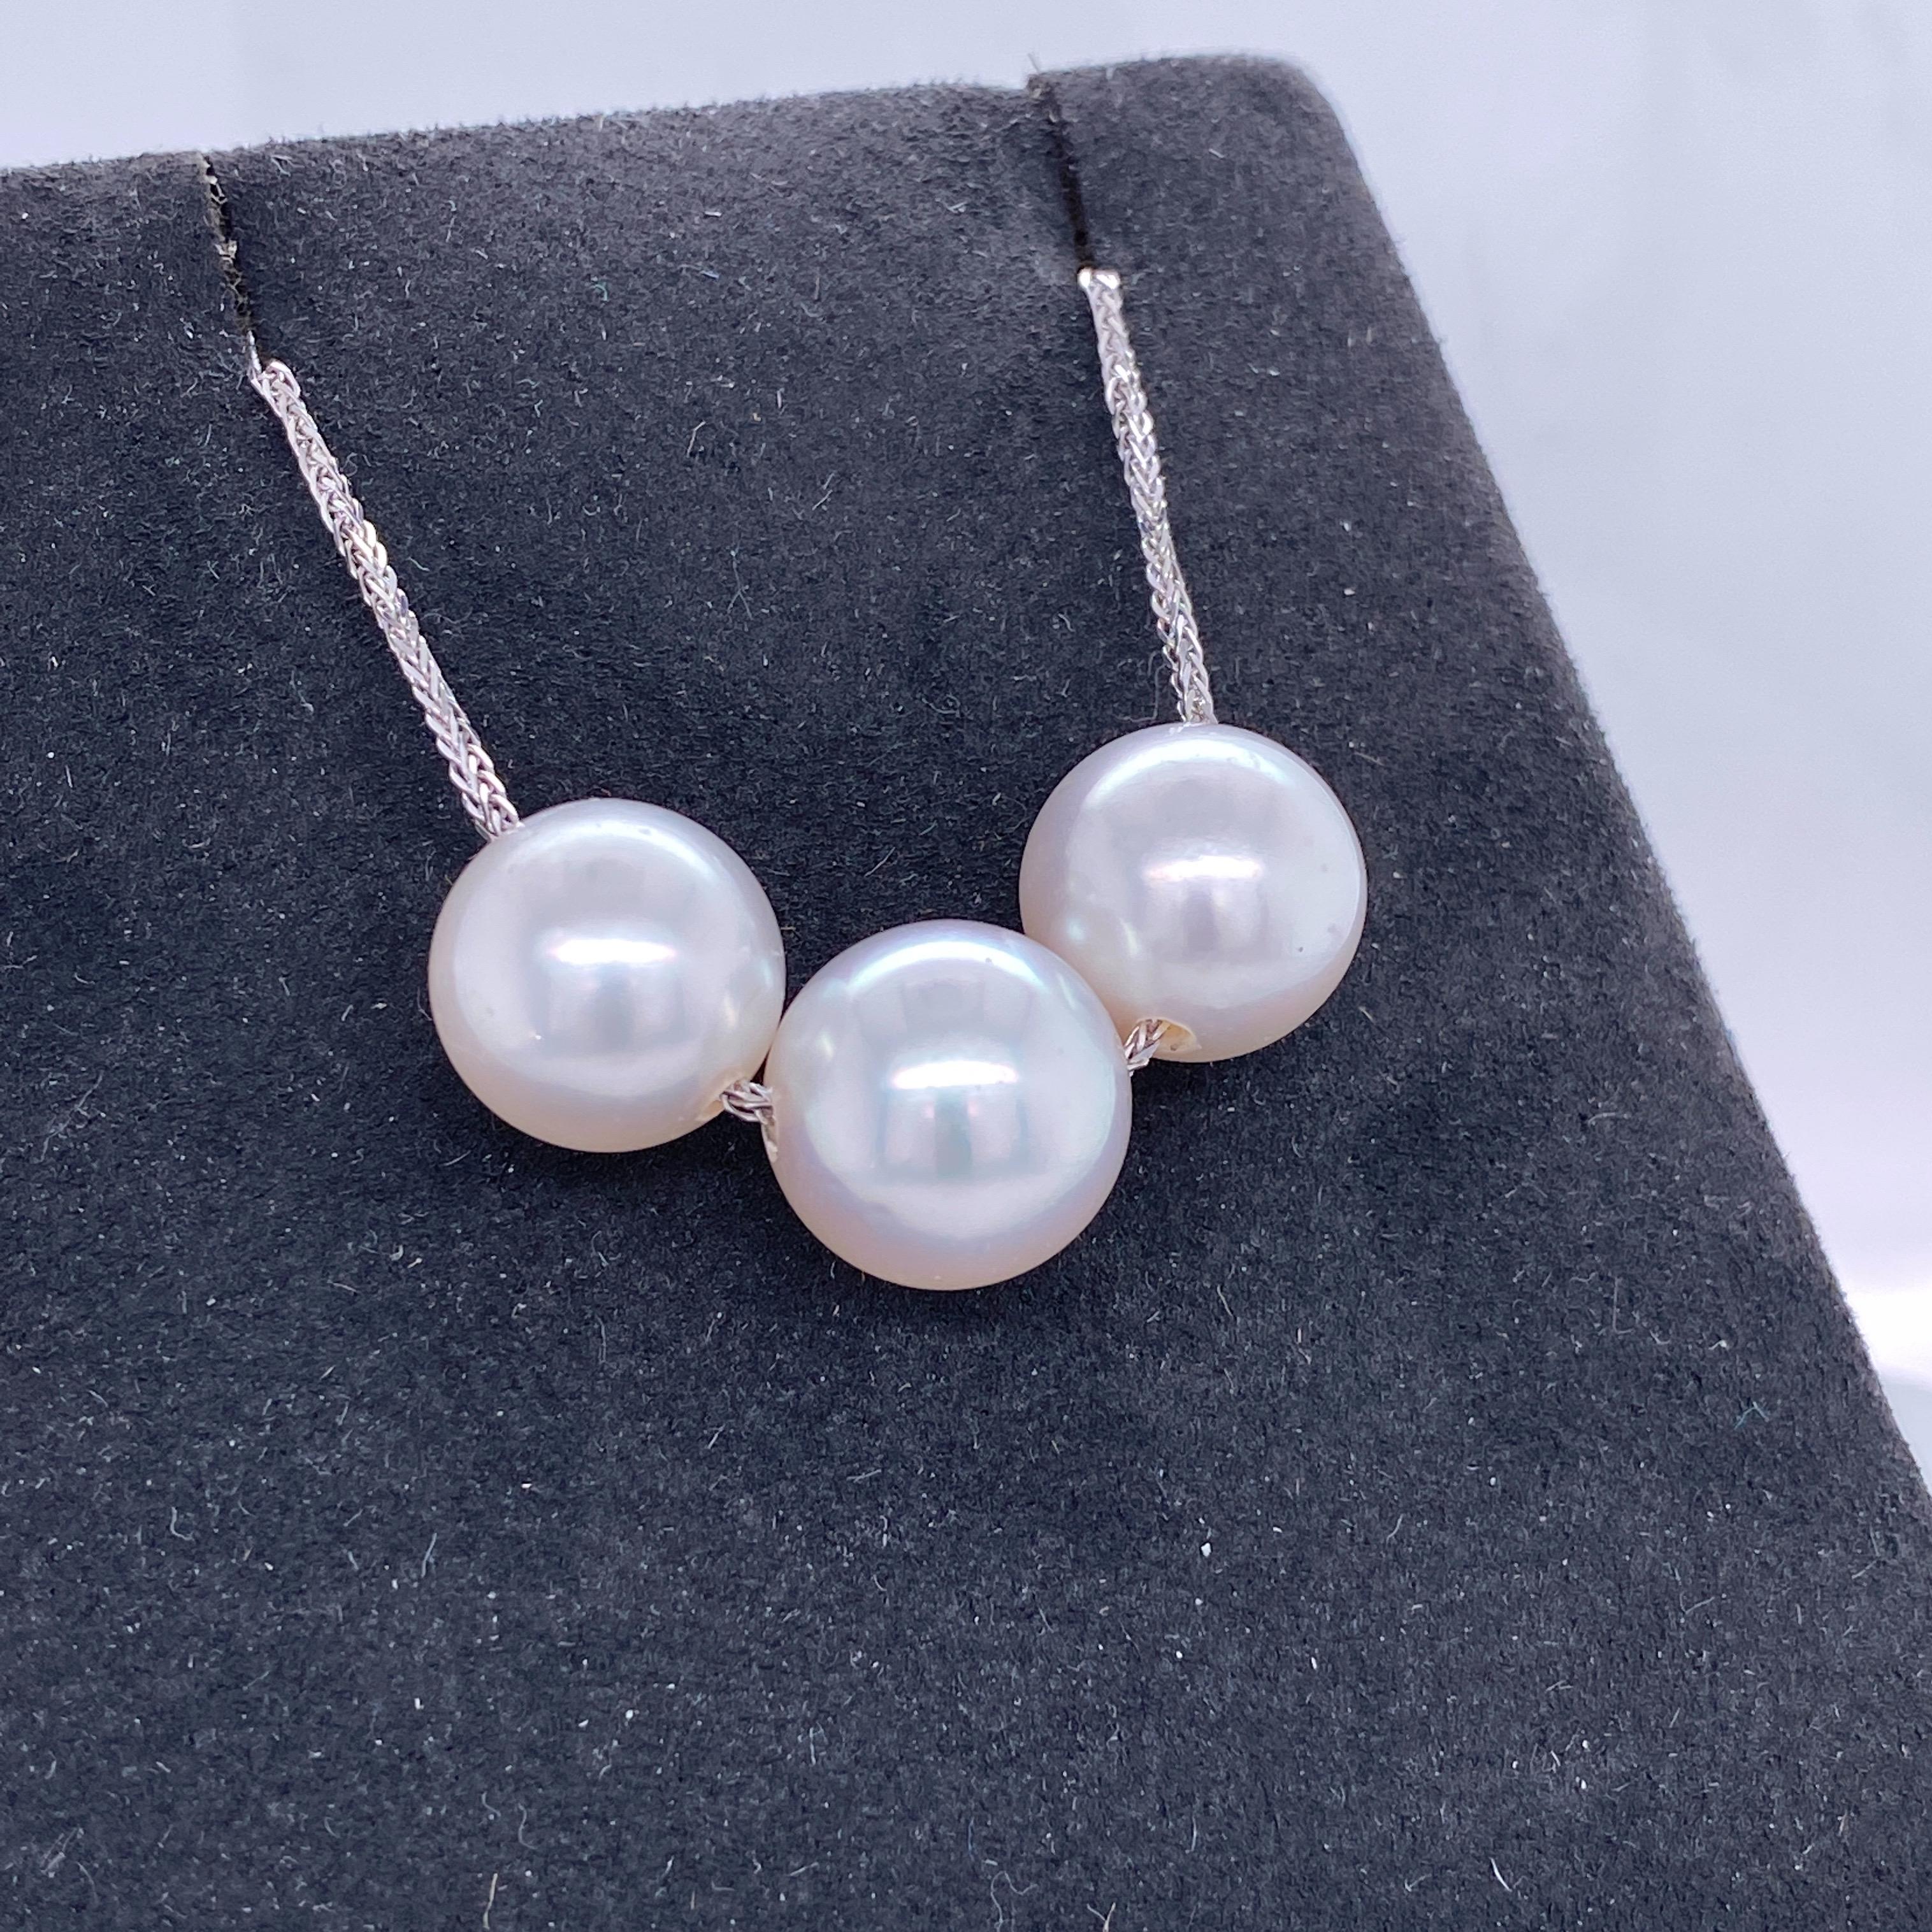 18K White gold slider necklace featuring three South Sea Pearls measuring 11-13 mm.
Great for stacking layers!

Pearls can be changed to Tahitian, Pink or Golden upon request. Price subject to change. 